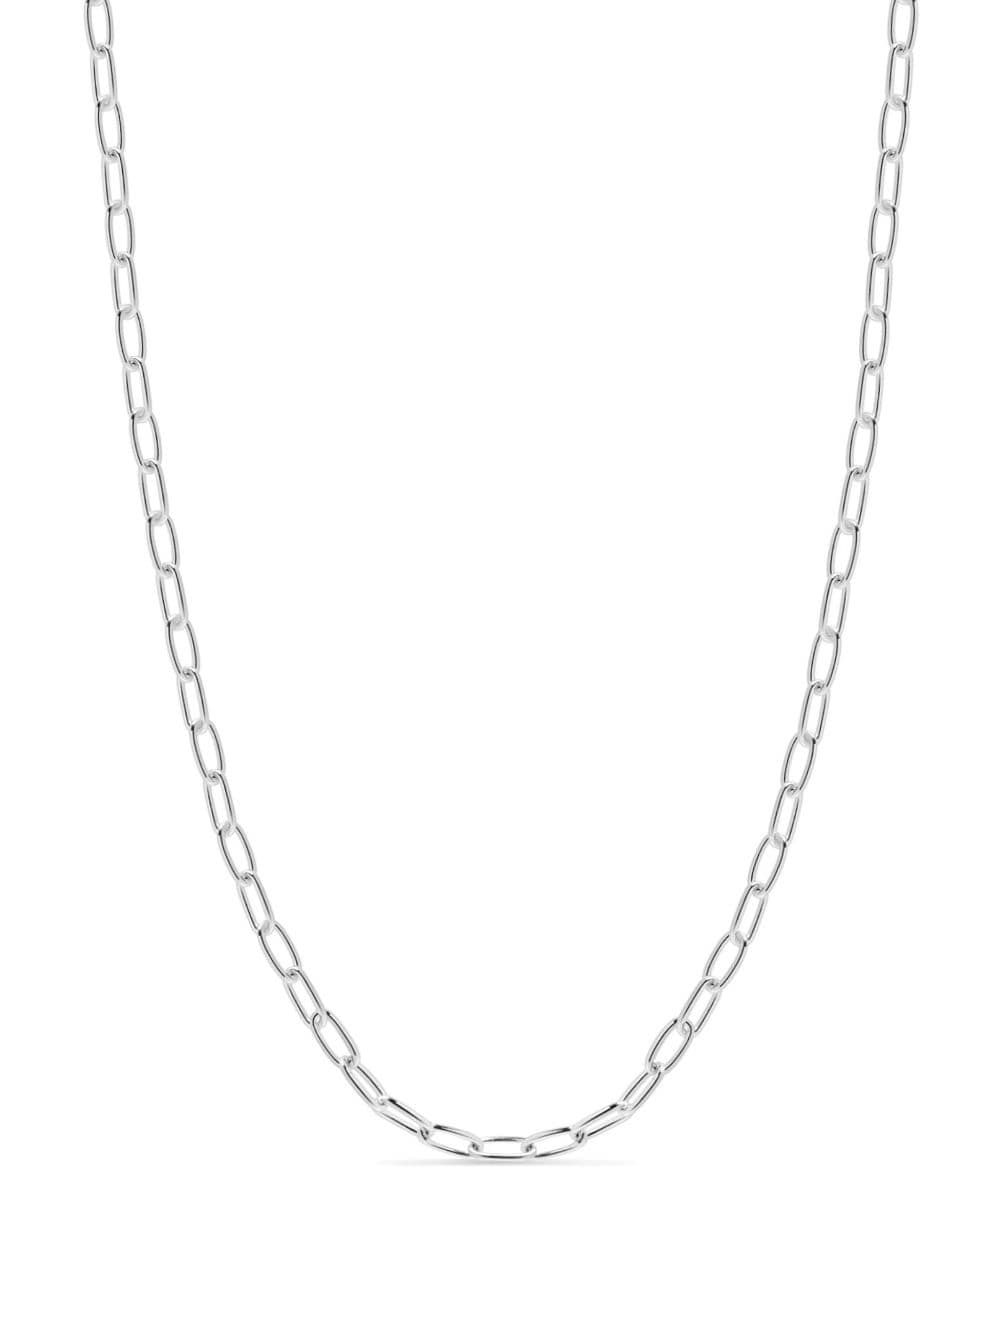 Image 1 of Nialaya Jewelry sterling silver cable-link necklace